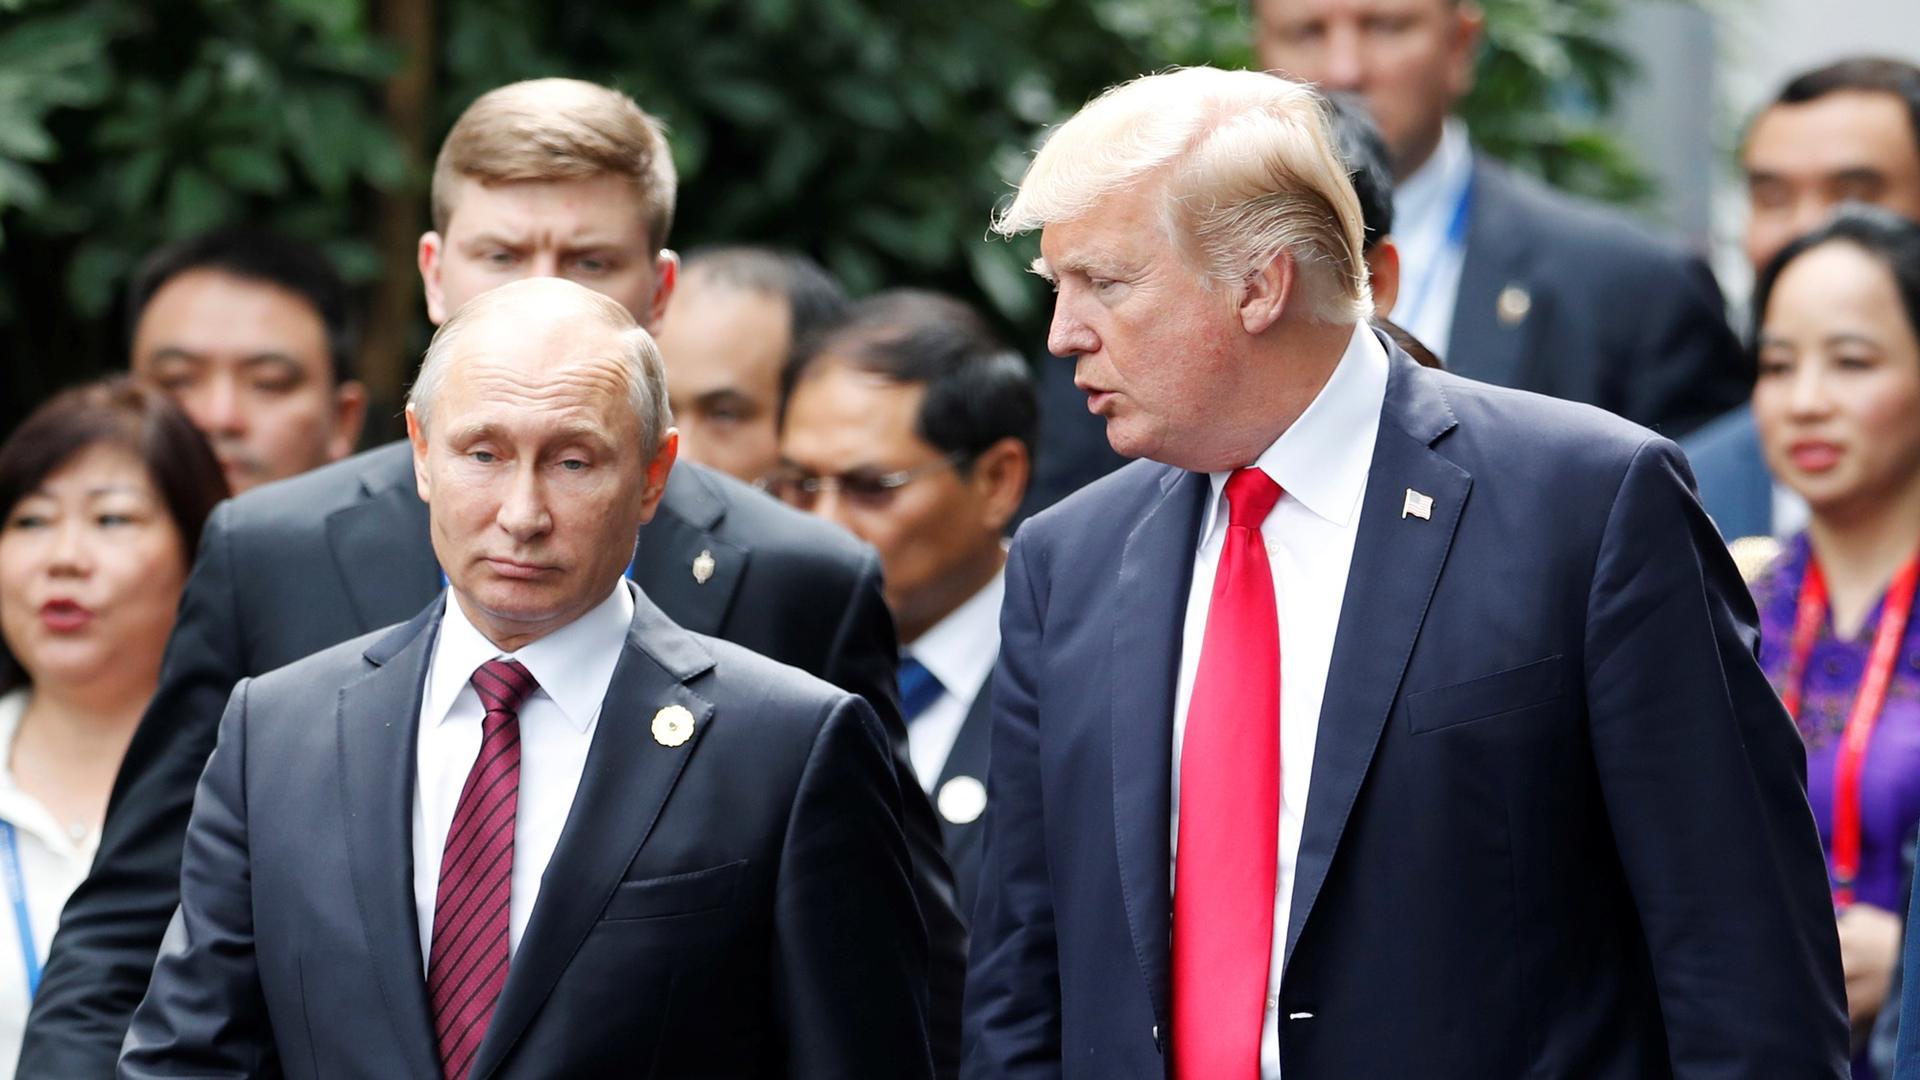 US President Donald Trump and Russian President Vladimir Putin are seen walking side-by-side surrounded by other officials.